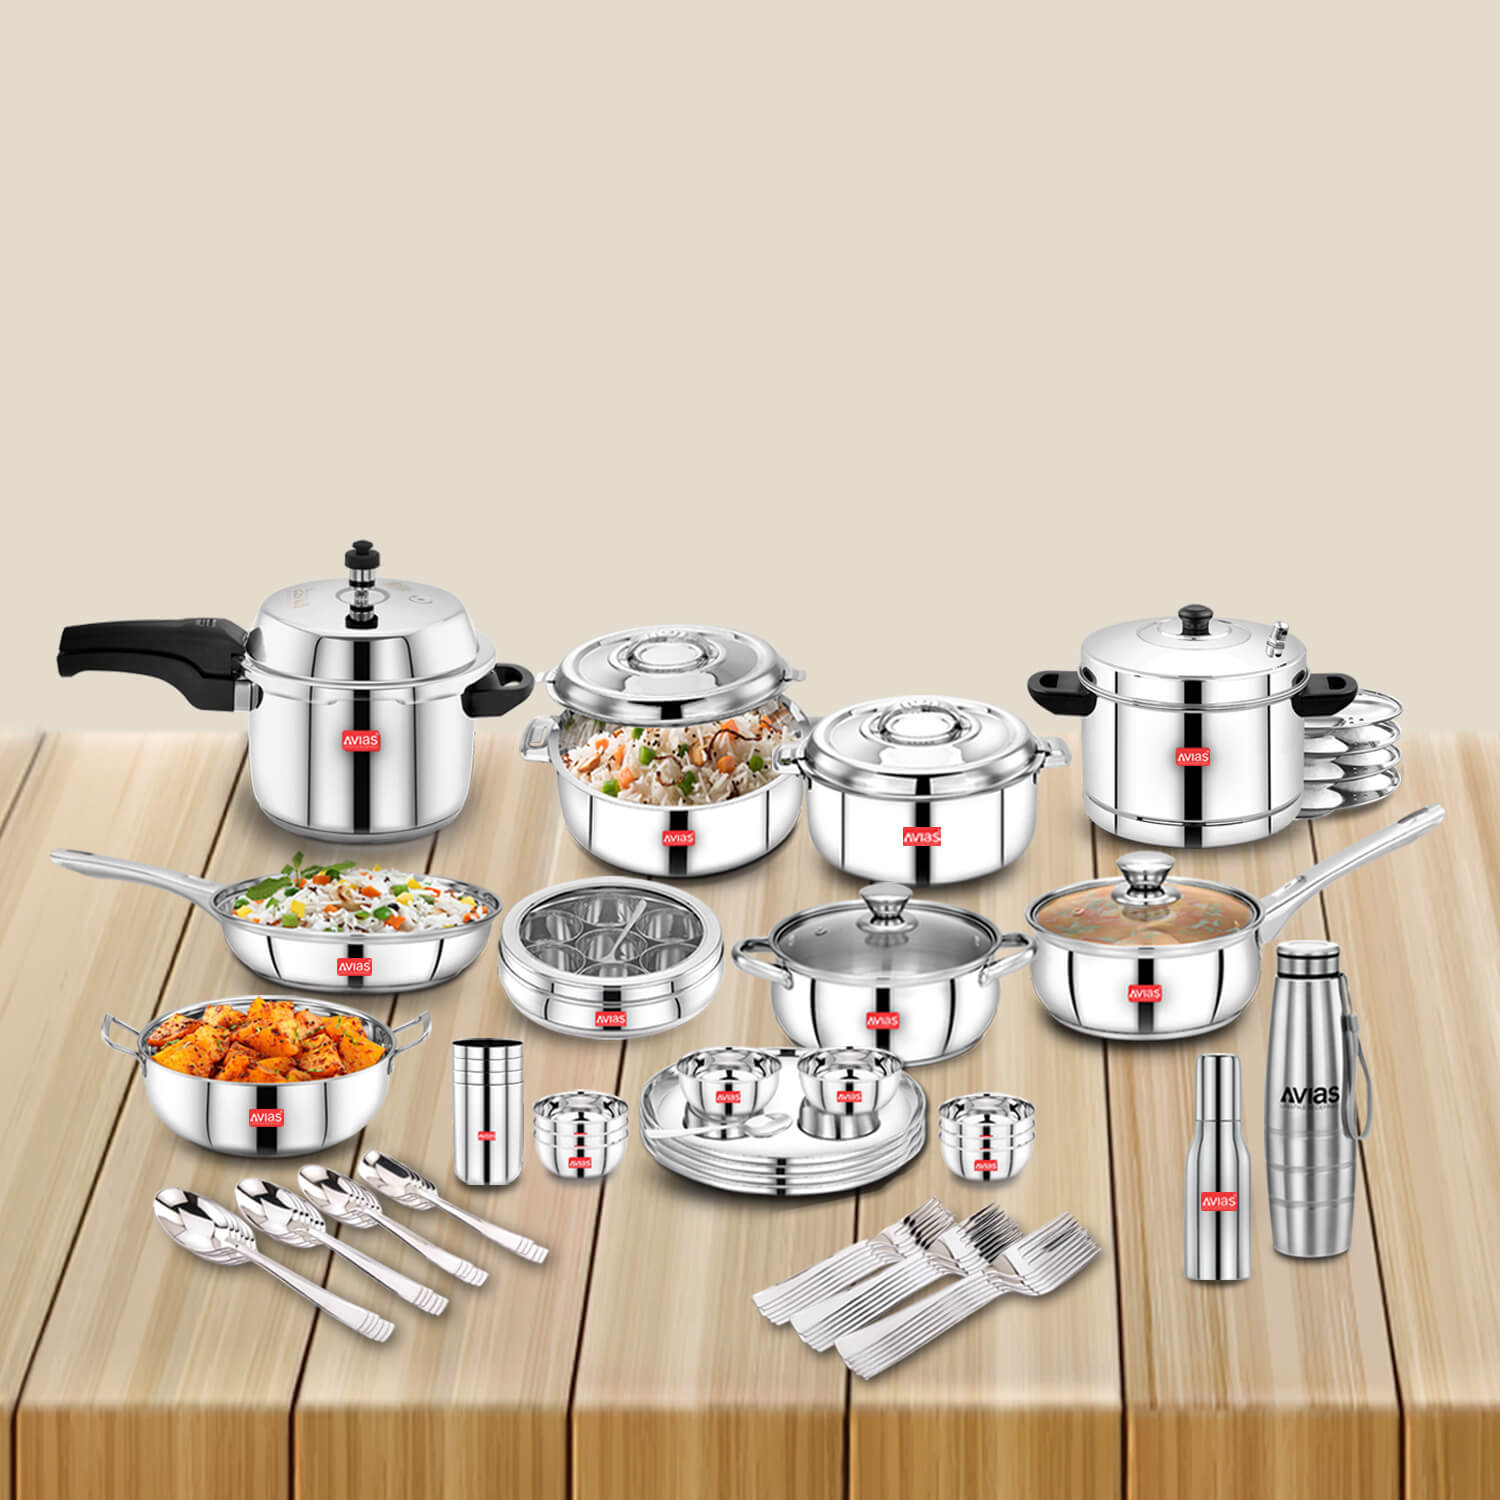 Stainless Steel 71 PCS Kitchen Set | Standard | High Grade And Premium Quality Stainless Steel